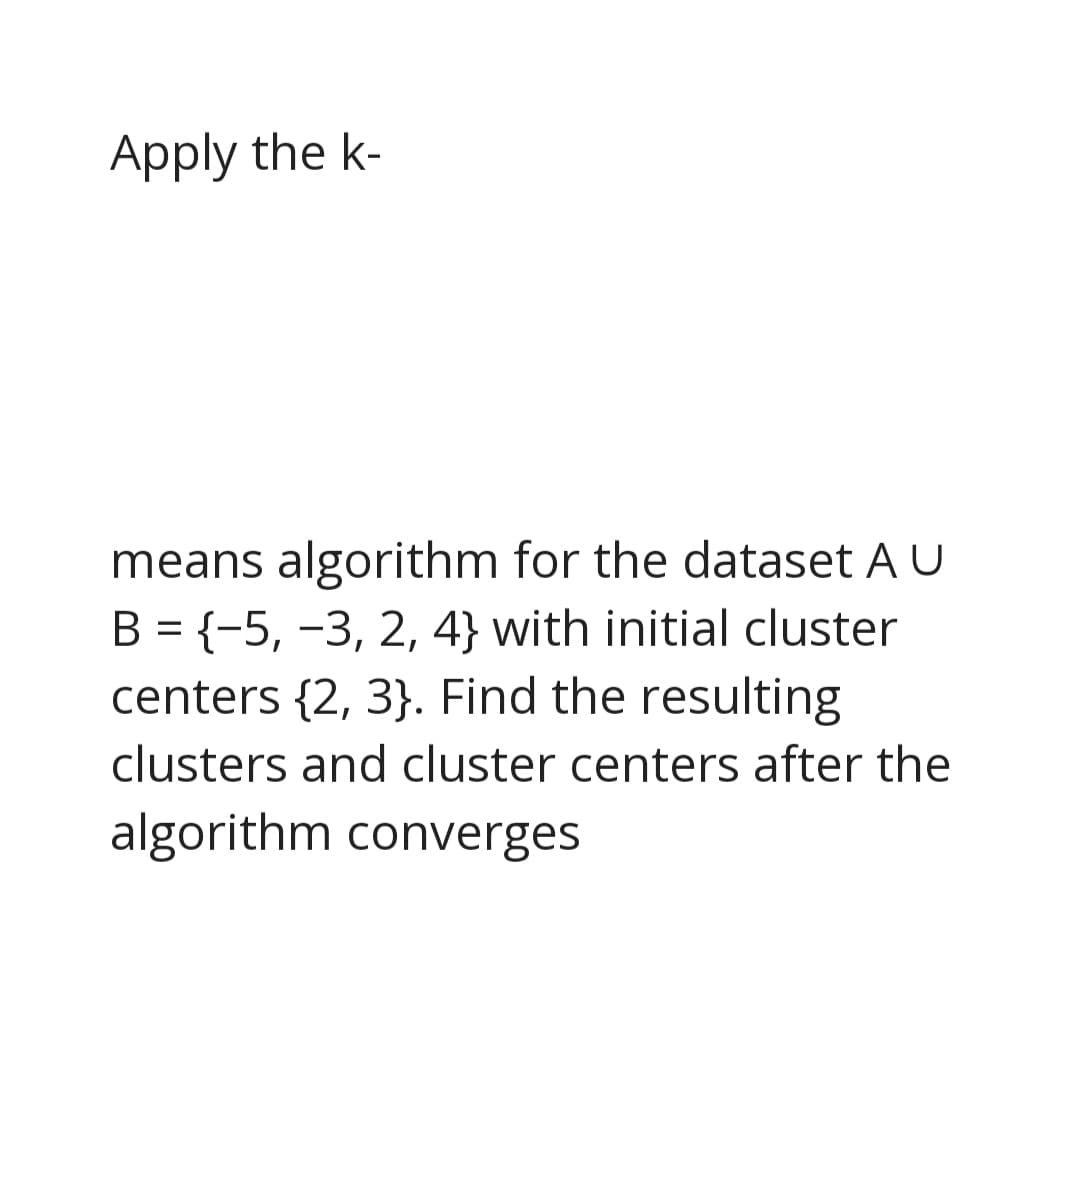 Apply the k-
means algorithm for the dataset A U
B = {-5, -3, 2, 4} with initial cluster
centers {2, 3}. Find the resulting
clusters and cluster centers after the
algorithm converges
